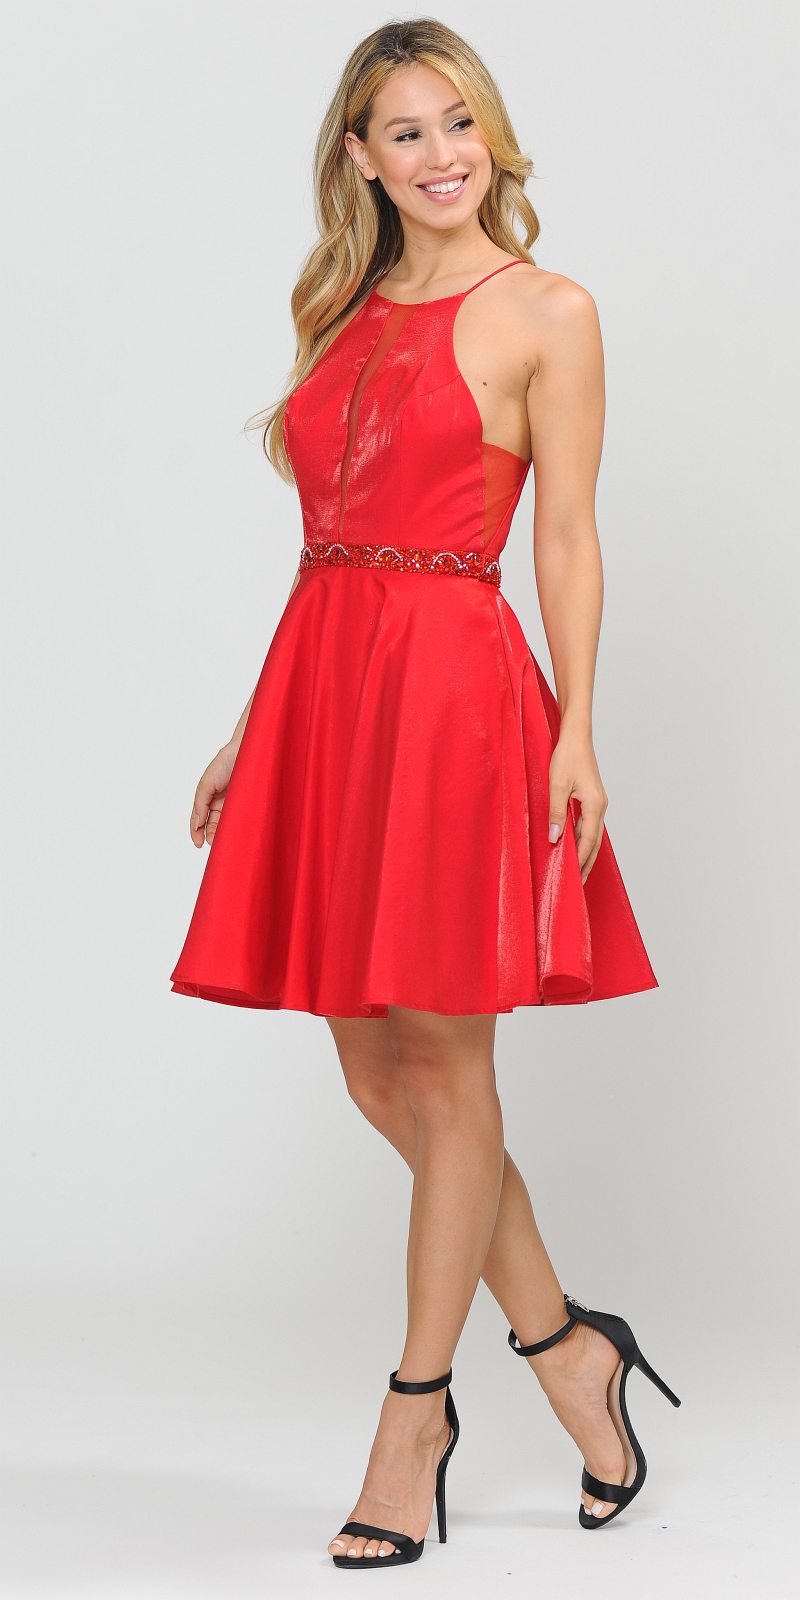 Poly USA 8236 Halter with Pockets Short Homecoming Dress Red